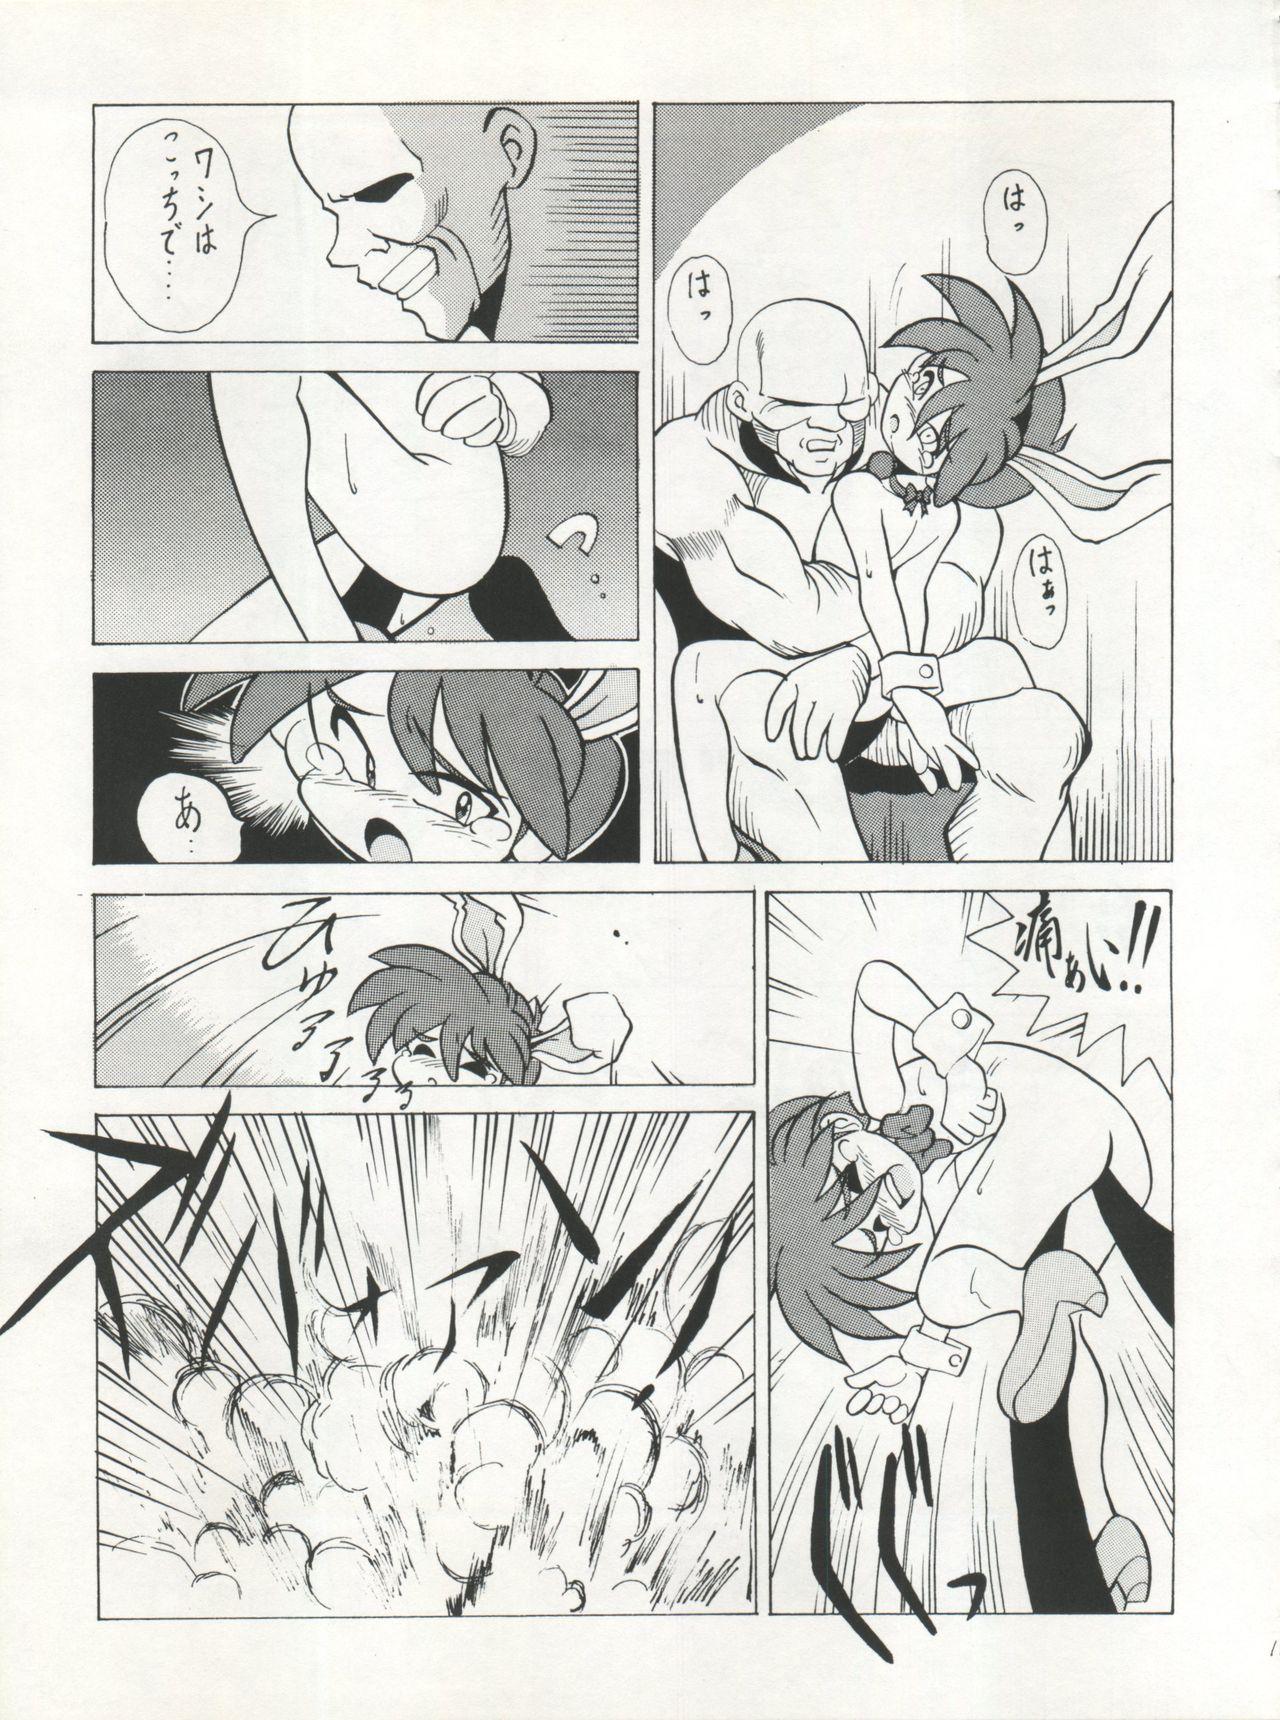 Stepsister SAMPLE Vol. 5 - Gunsmith cats Heidi girl of the alps Woman Fucking - Page 11